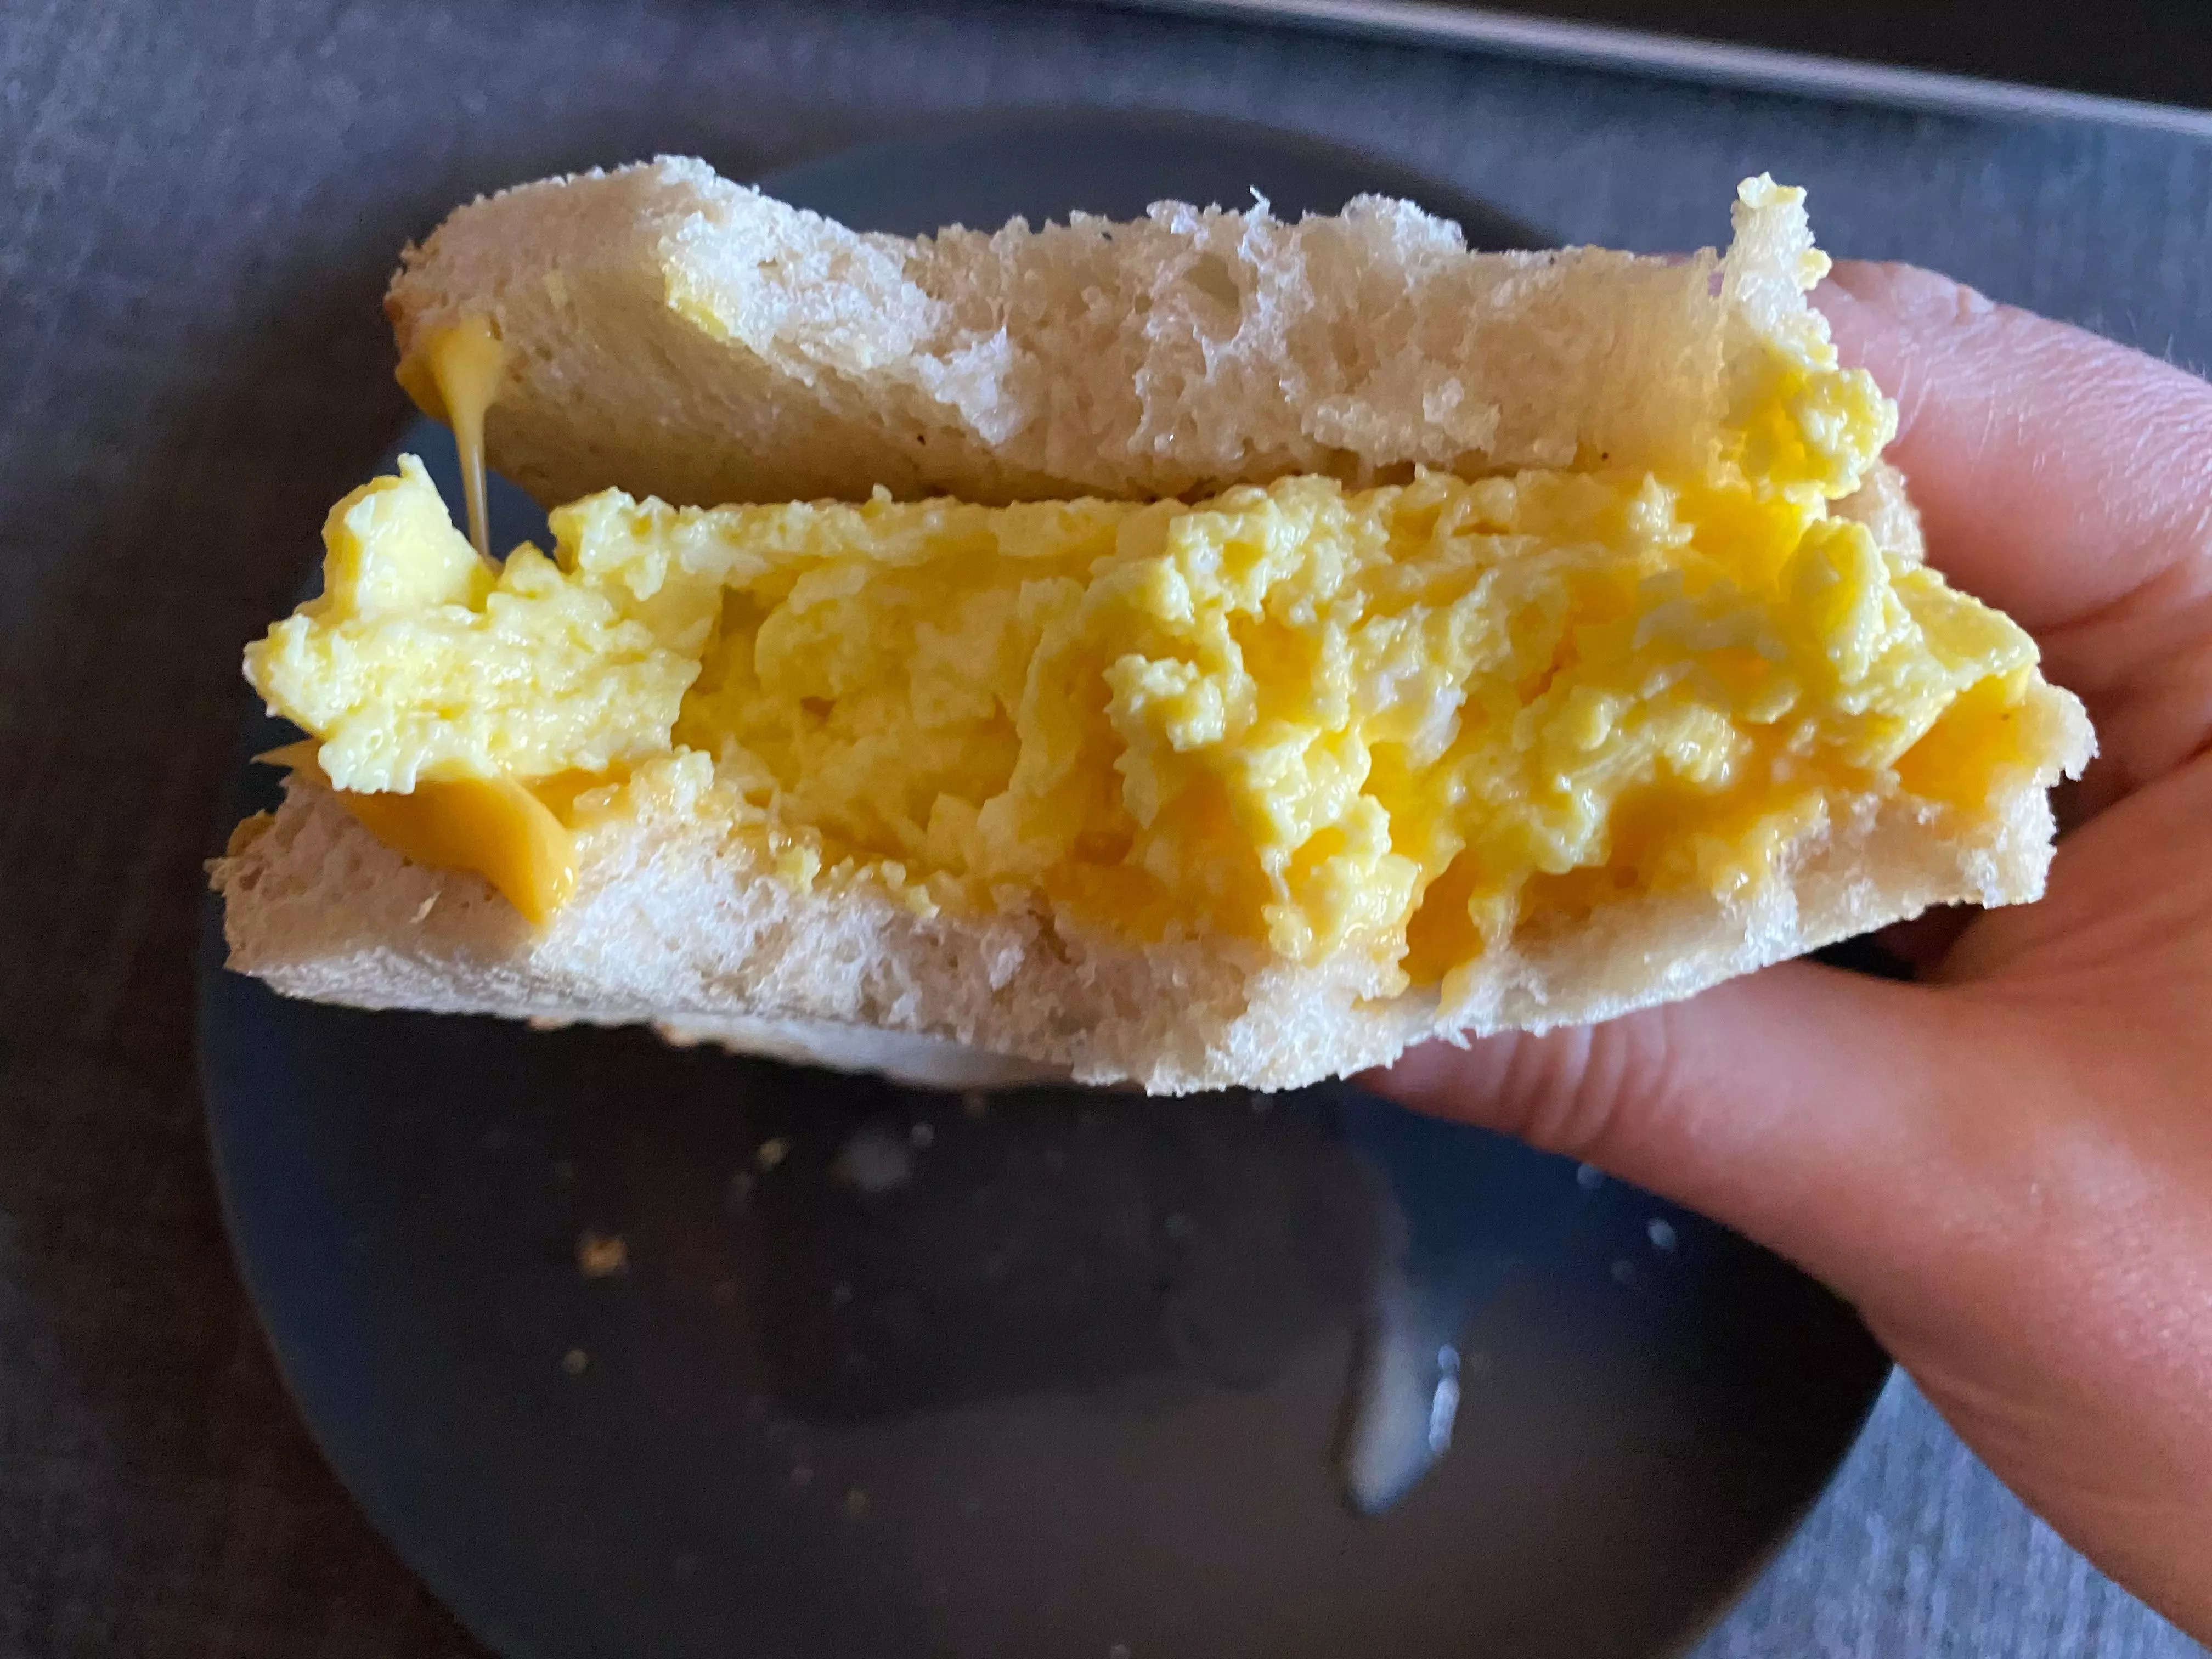 I Tried the 'Whirlpool' Trick to Make the Perfect Scramble Eggs, and Now It's My Go-to Method